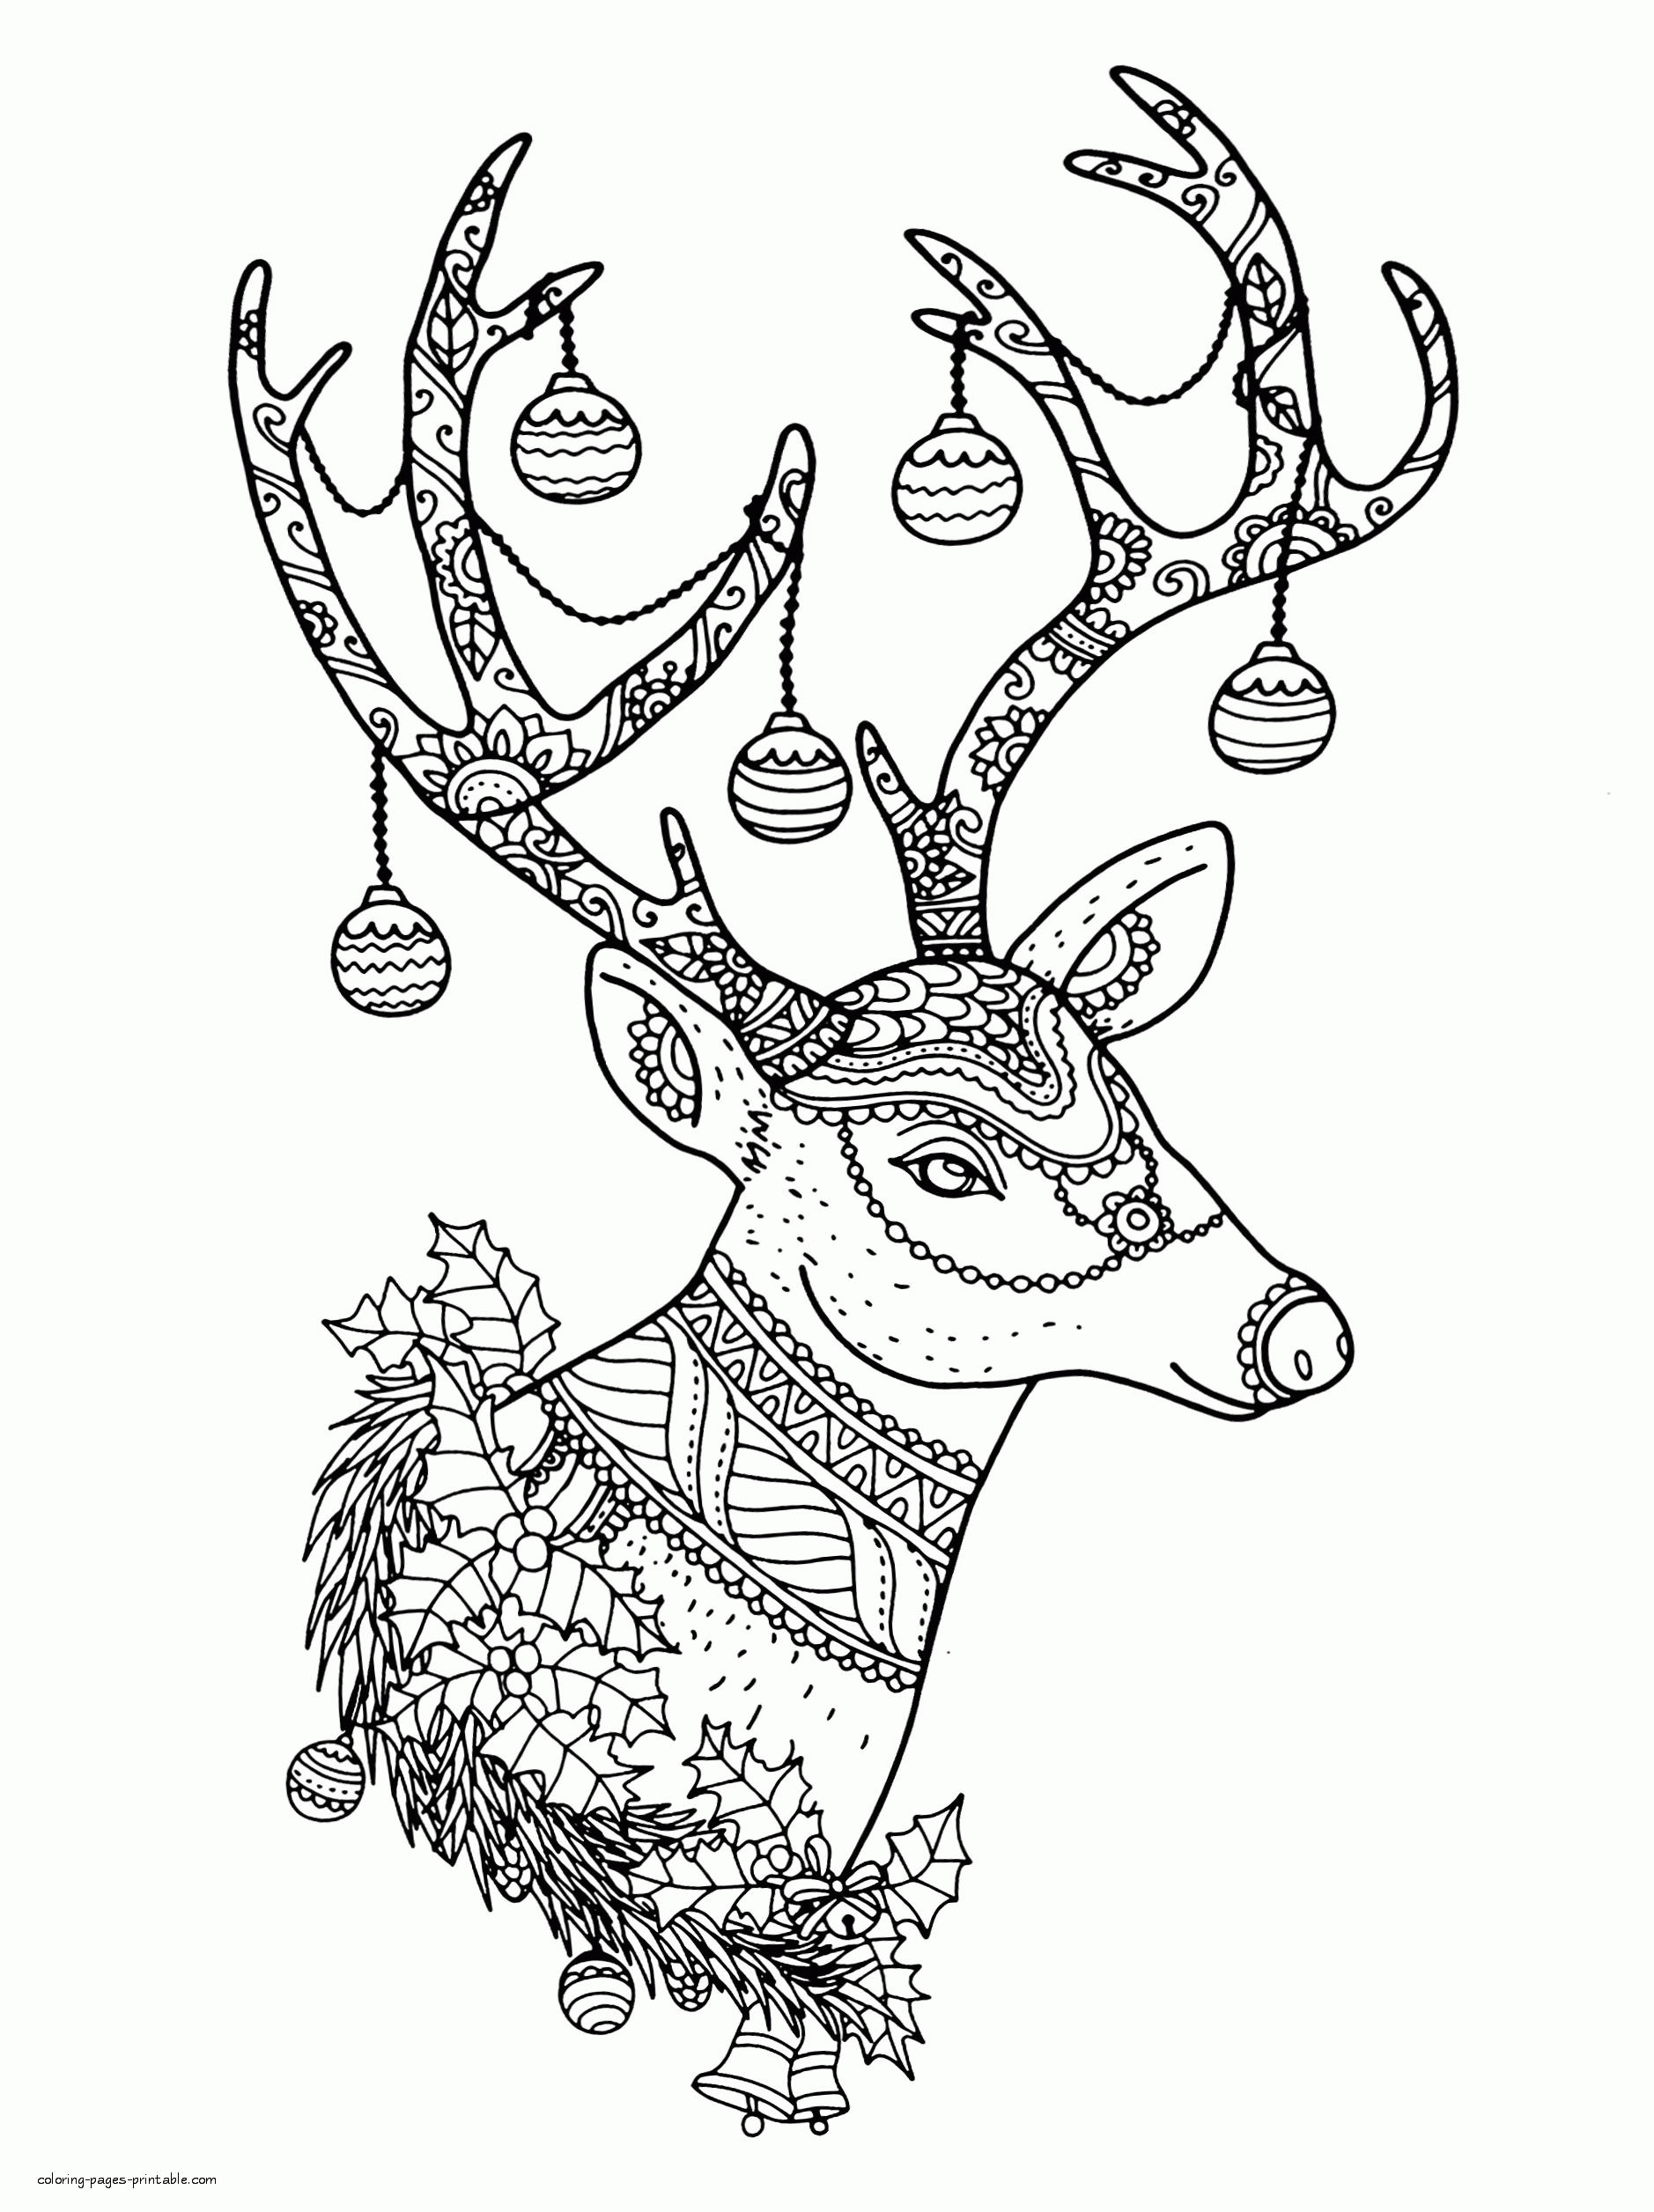 Free Christmas Reindeer Colouring Pages For Adults || COLORING-PAGES